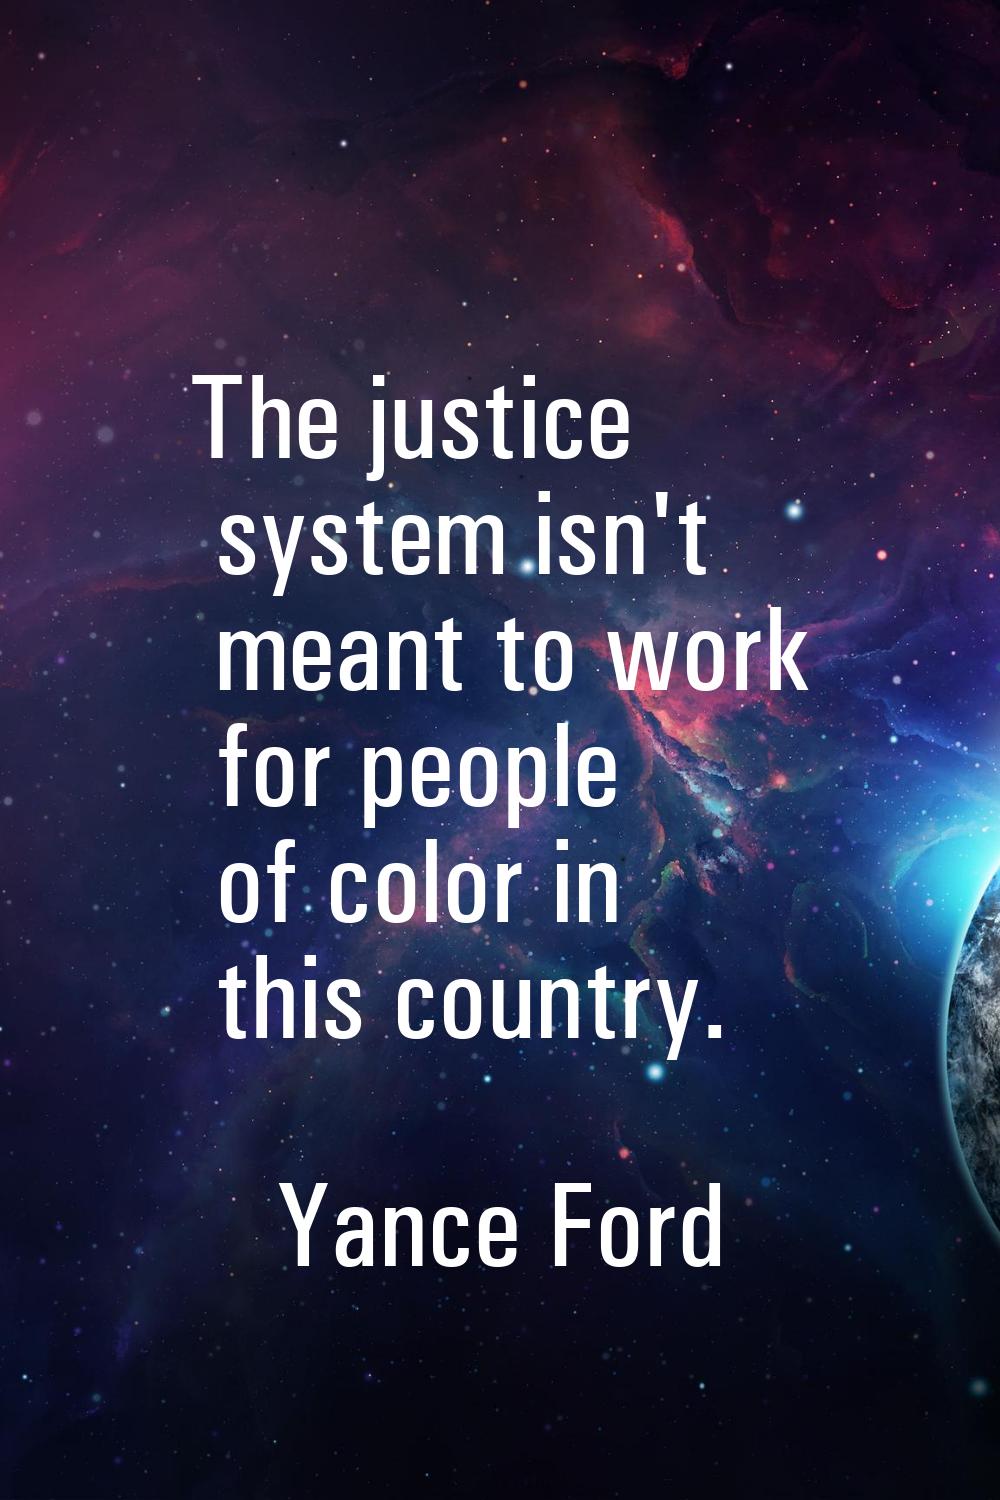 The justice system isn't meant to work for people of color in this country.